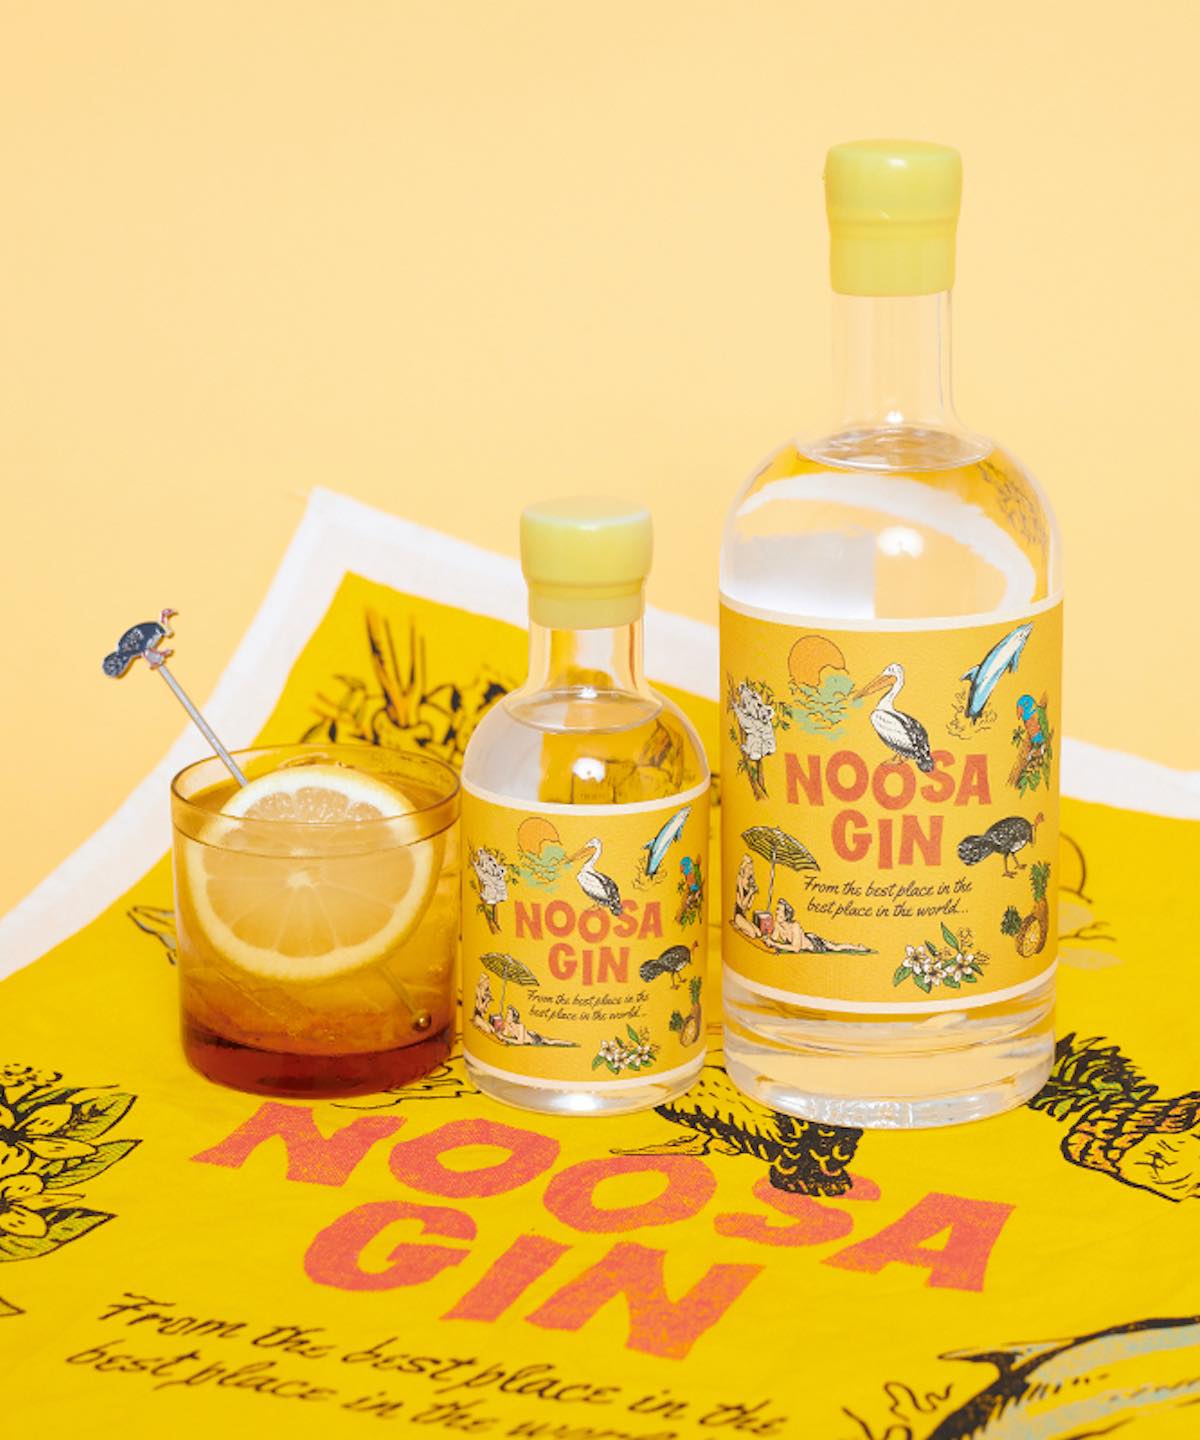 Welcome to Noosa Gin Co.